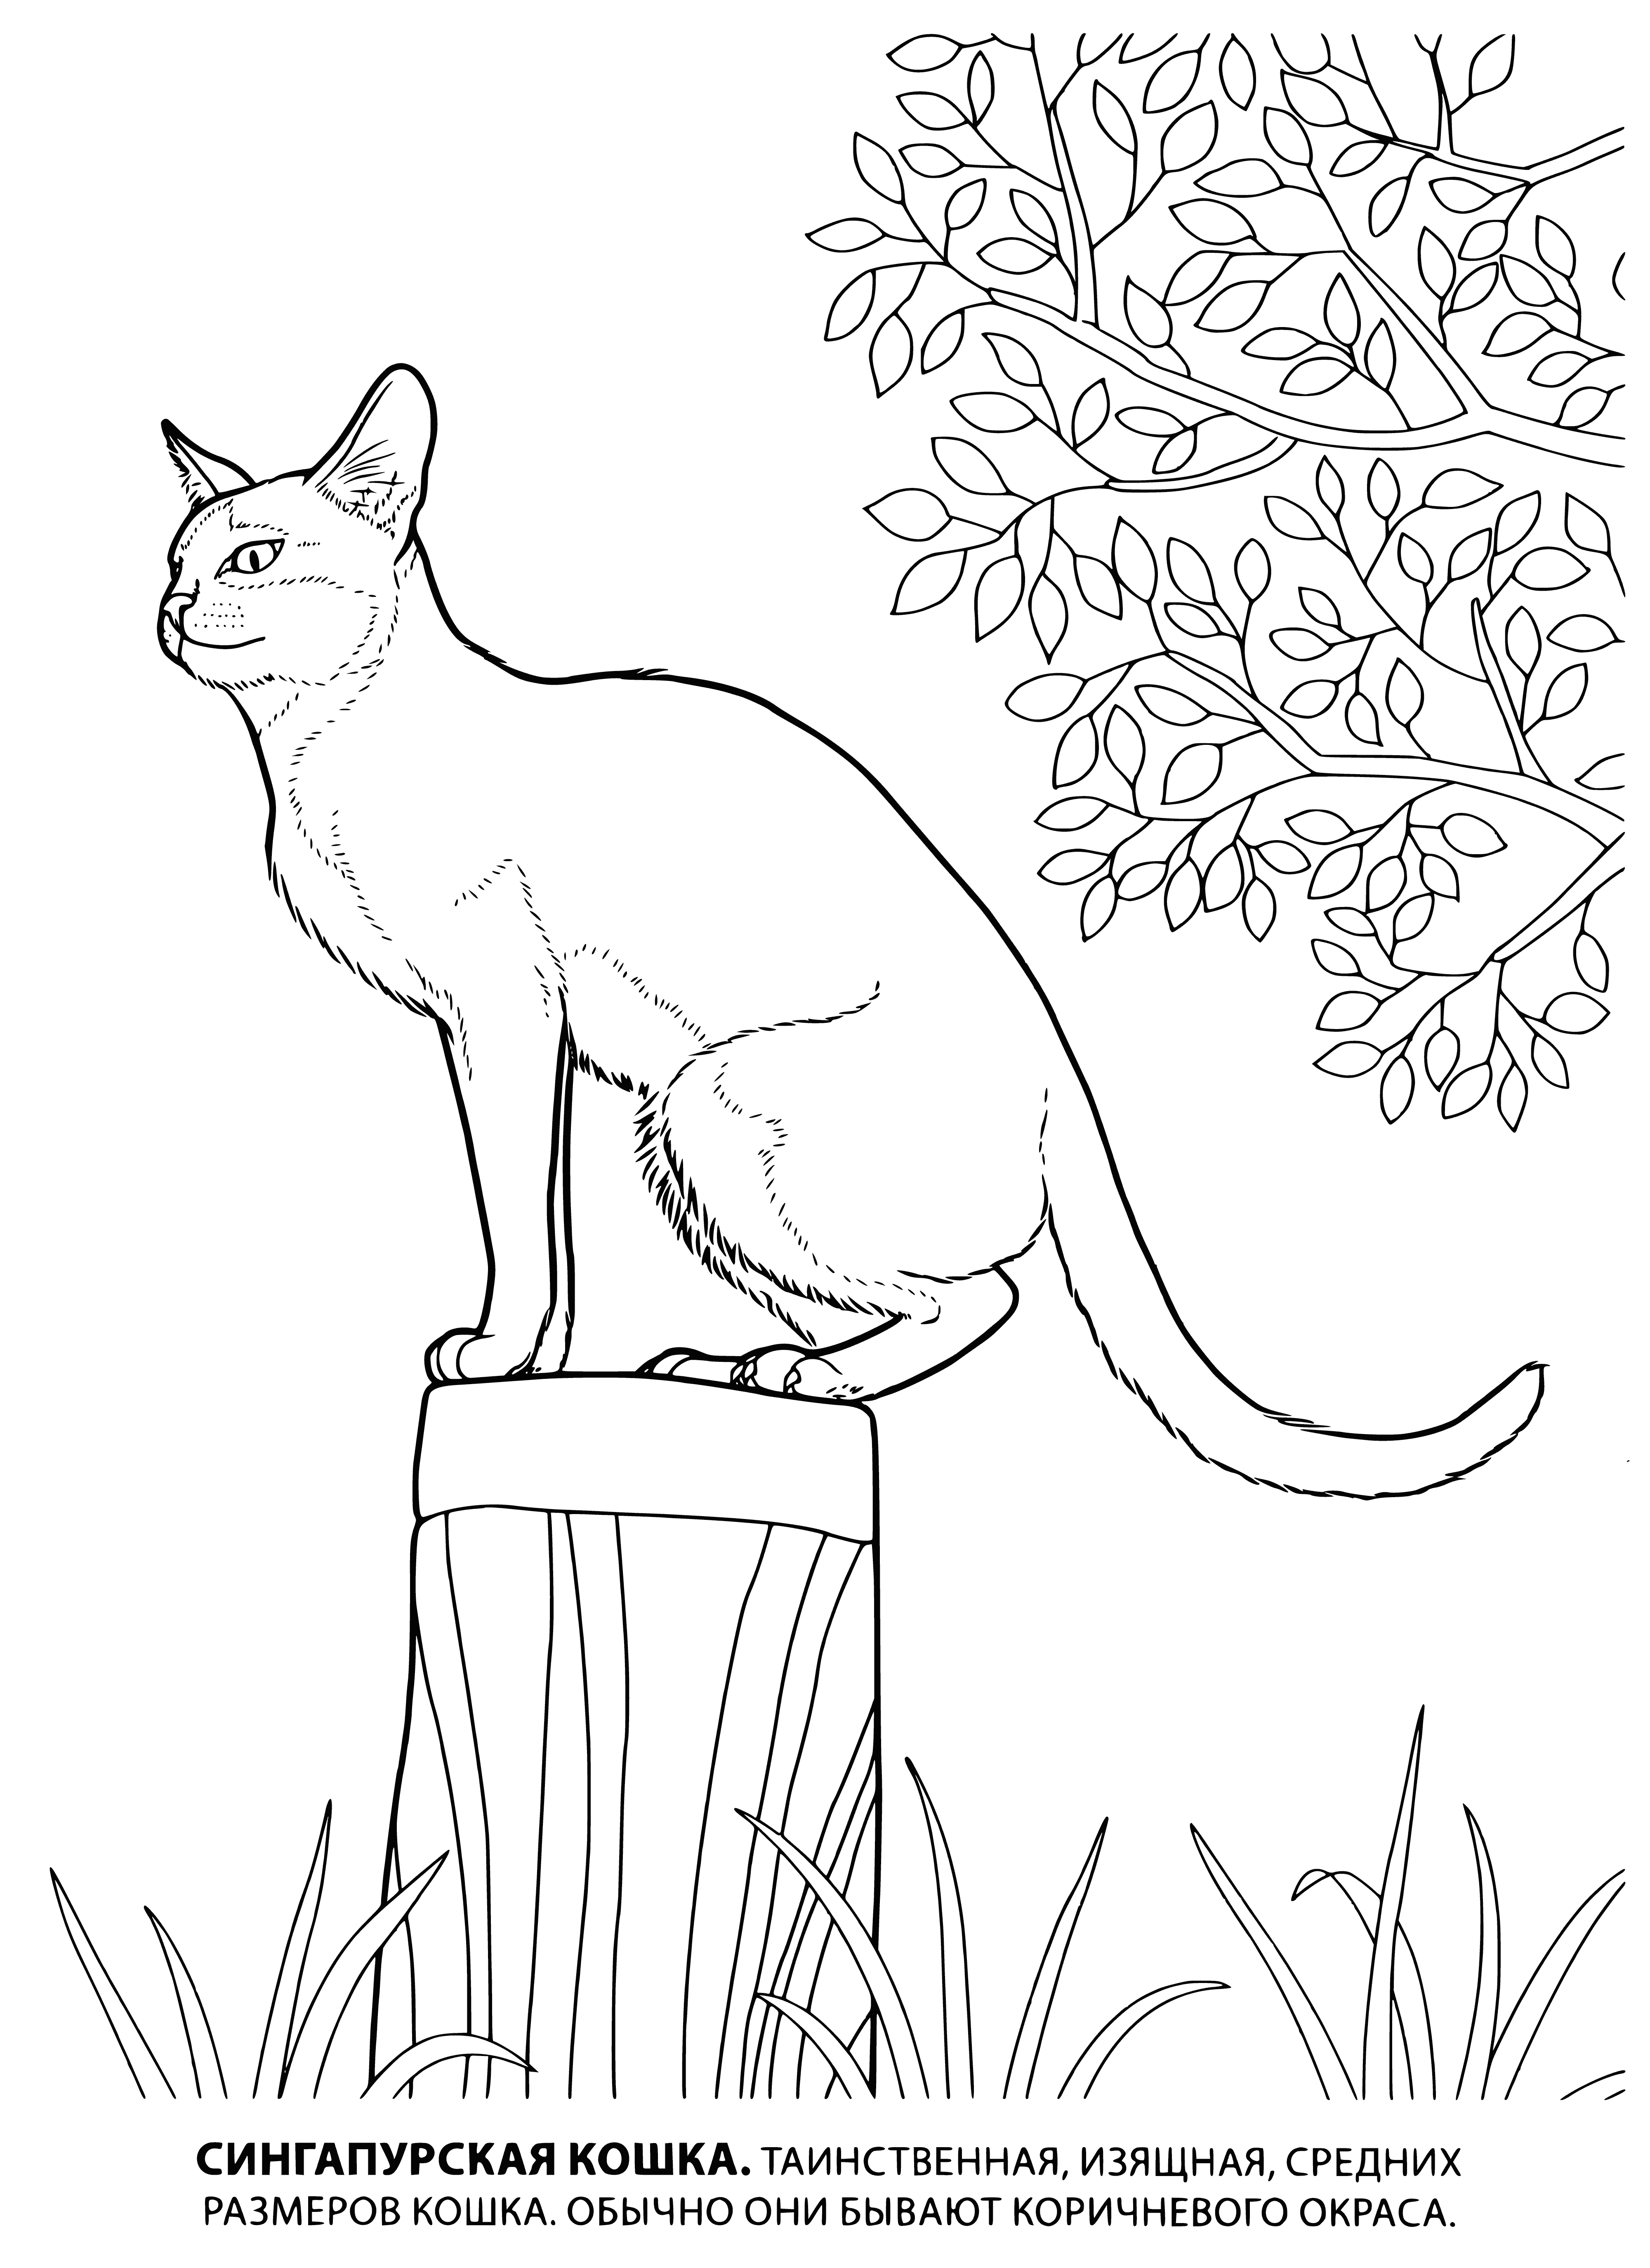 coloring page: Two gray cats, one sitting and one standing, looking at each other in a coloring page.